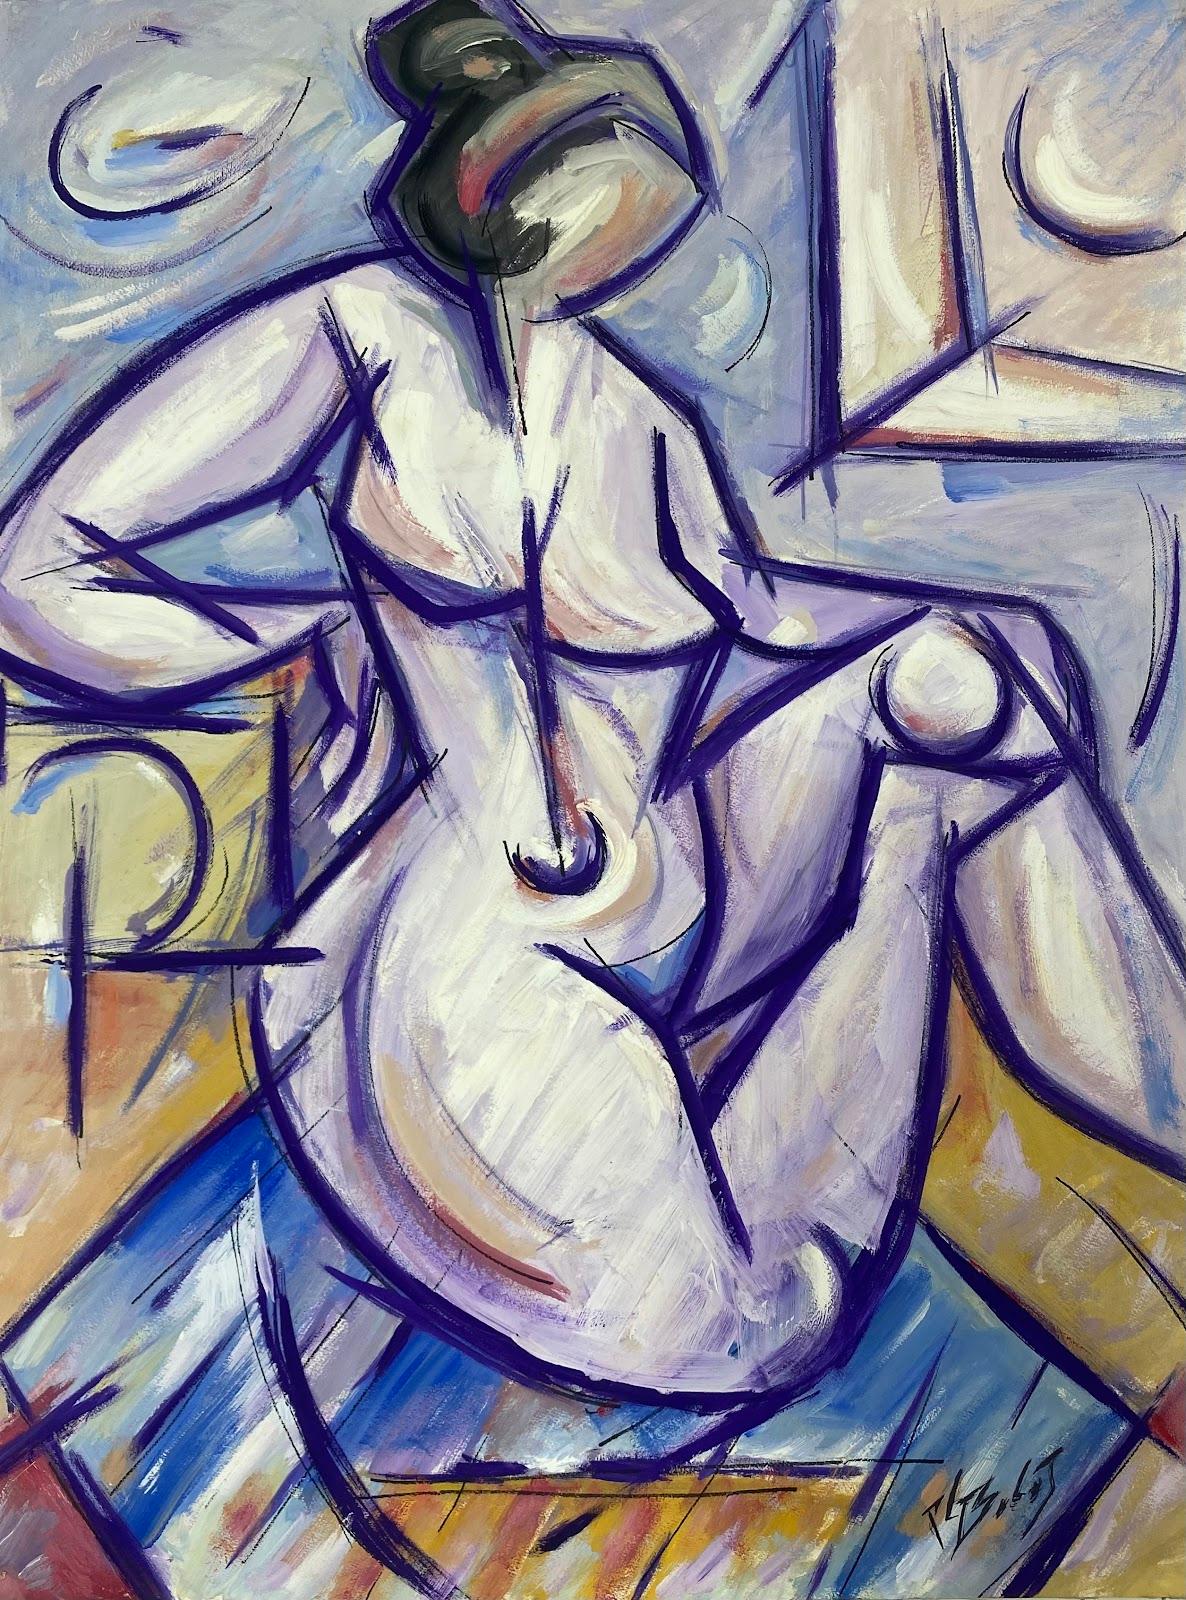 Paul-Louis Bolot (French 1918-2003) Figurative Painting - 1970's French Modernist Cubist Painting Seated Nude Woman Purple Abstract